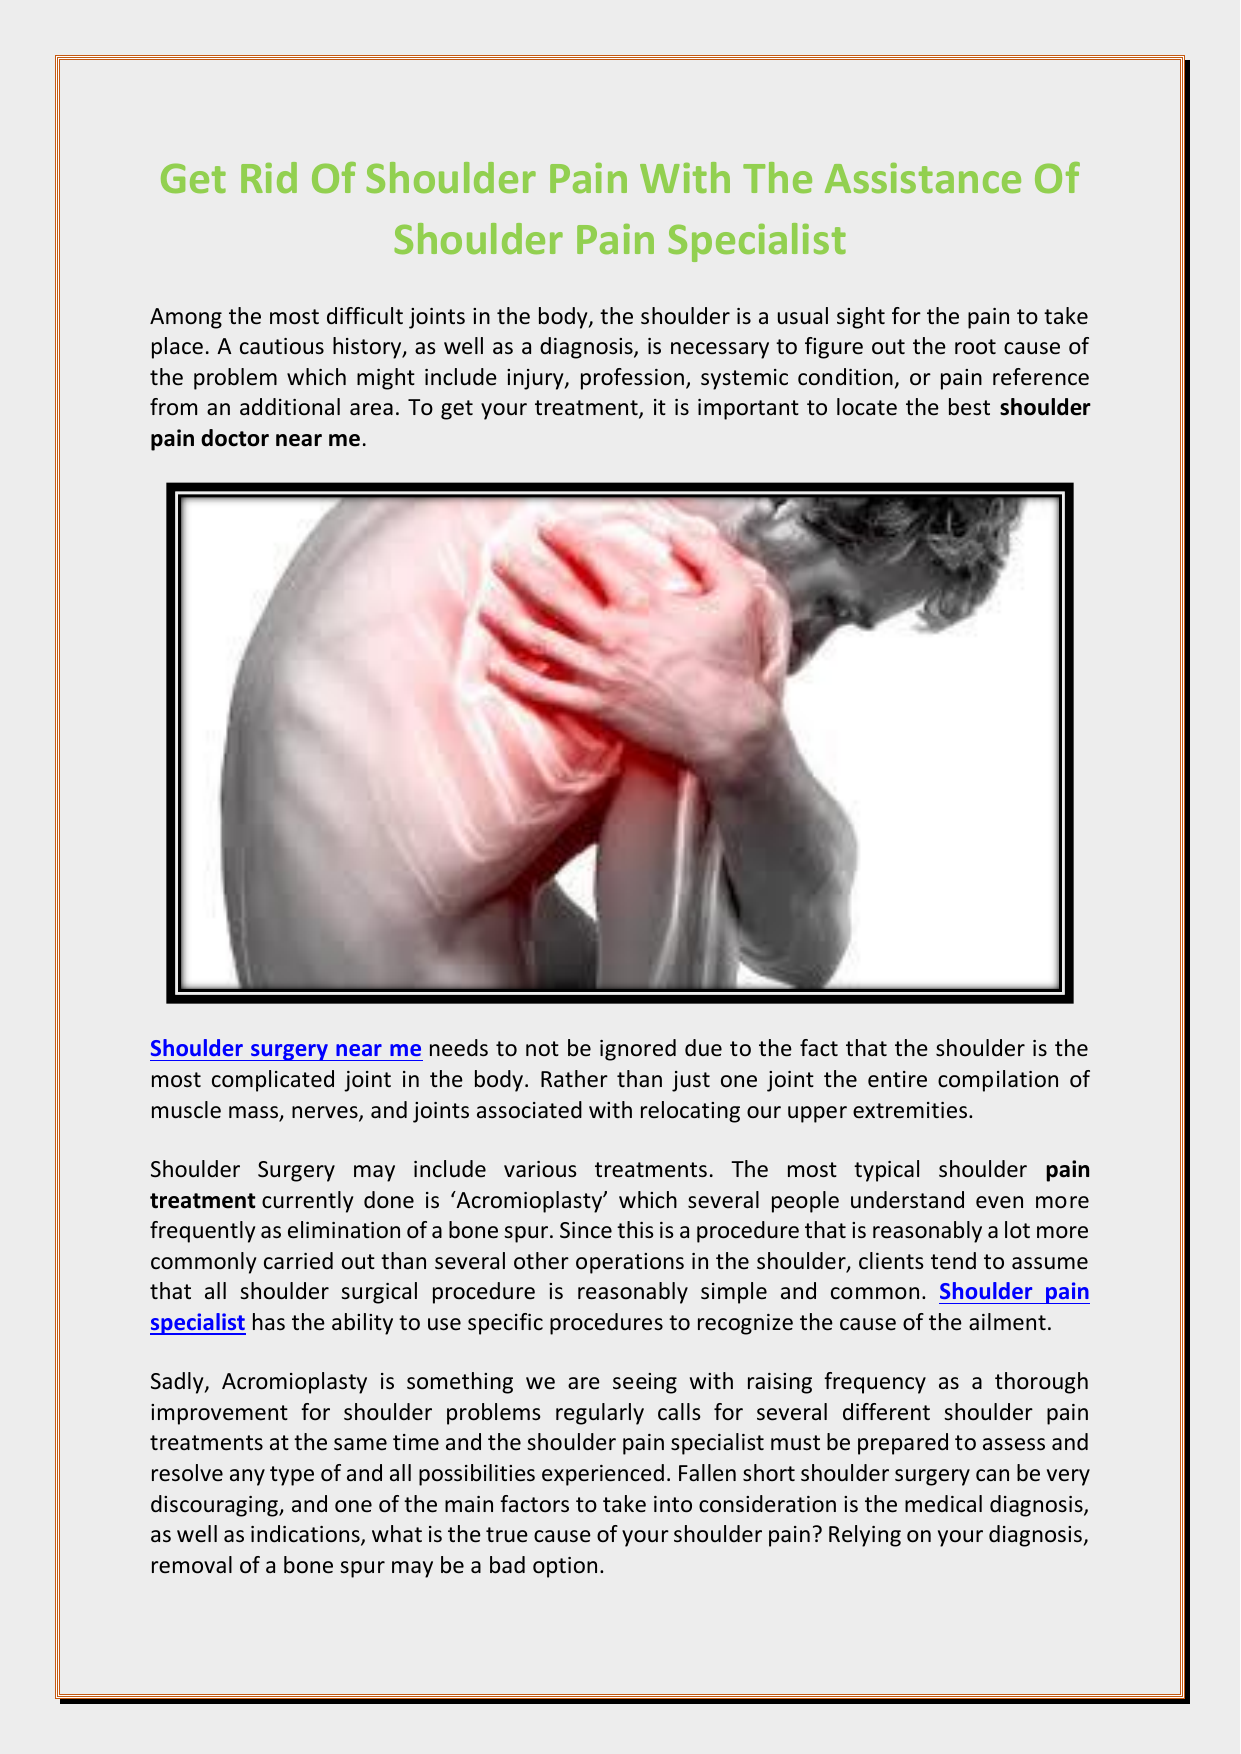 Get Rid Of Shoulder Pain With The Assistance Of Shoulder ...